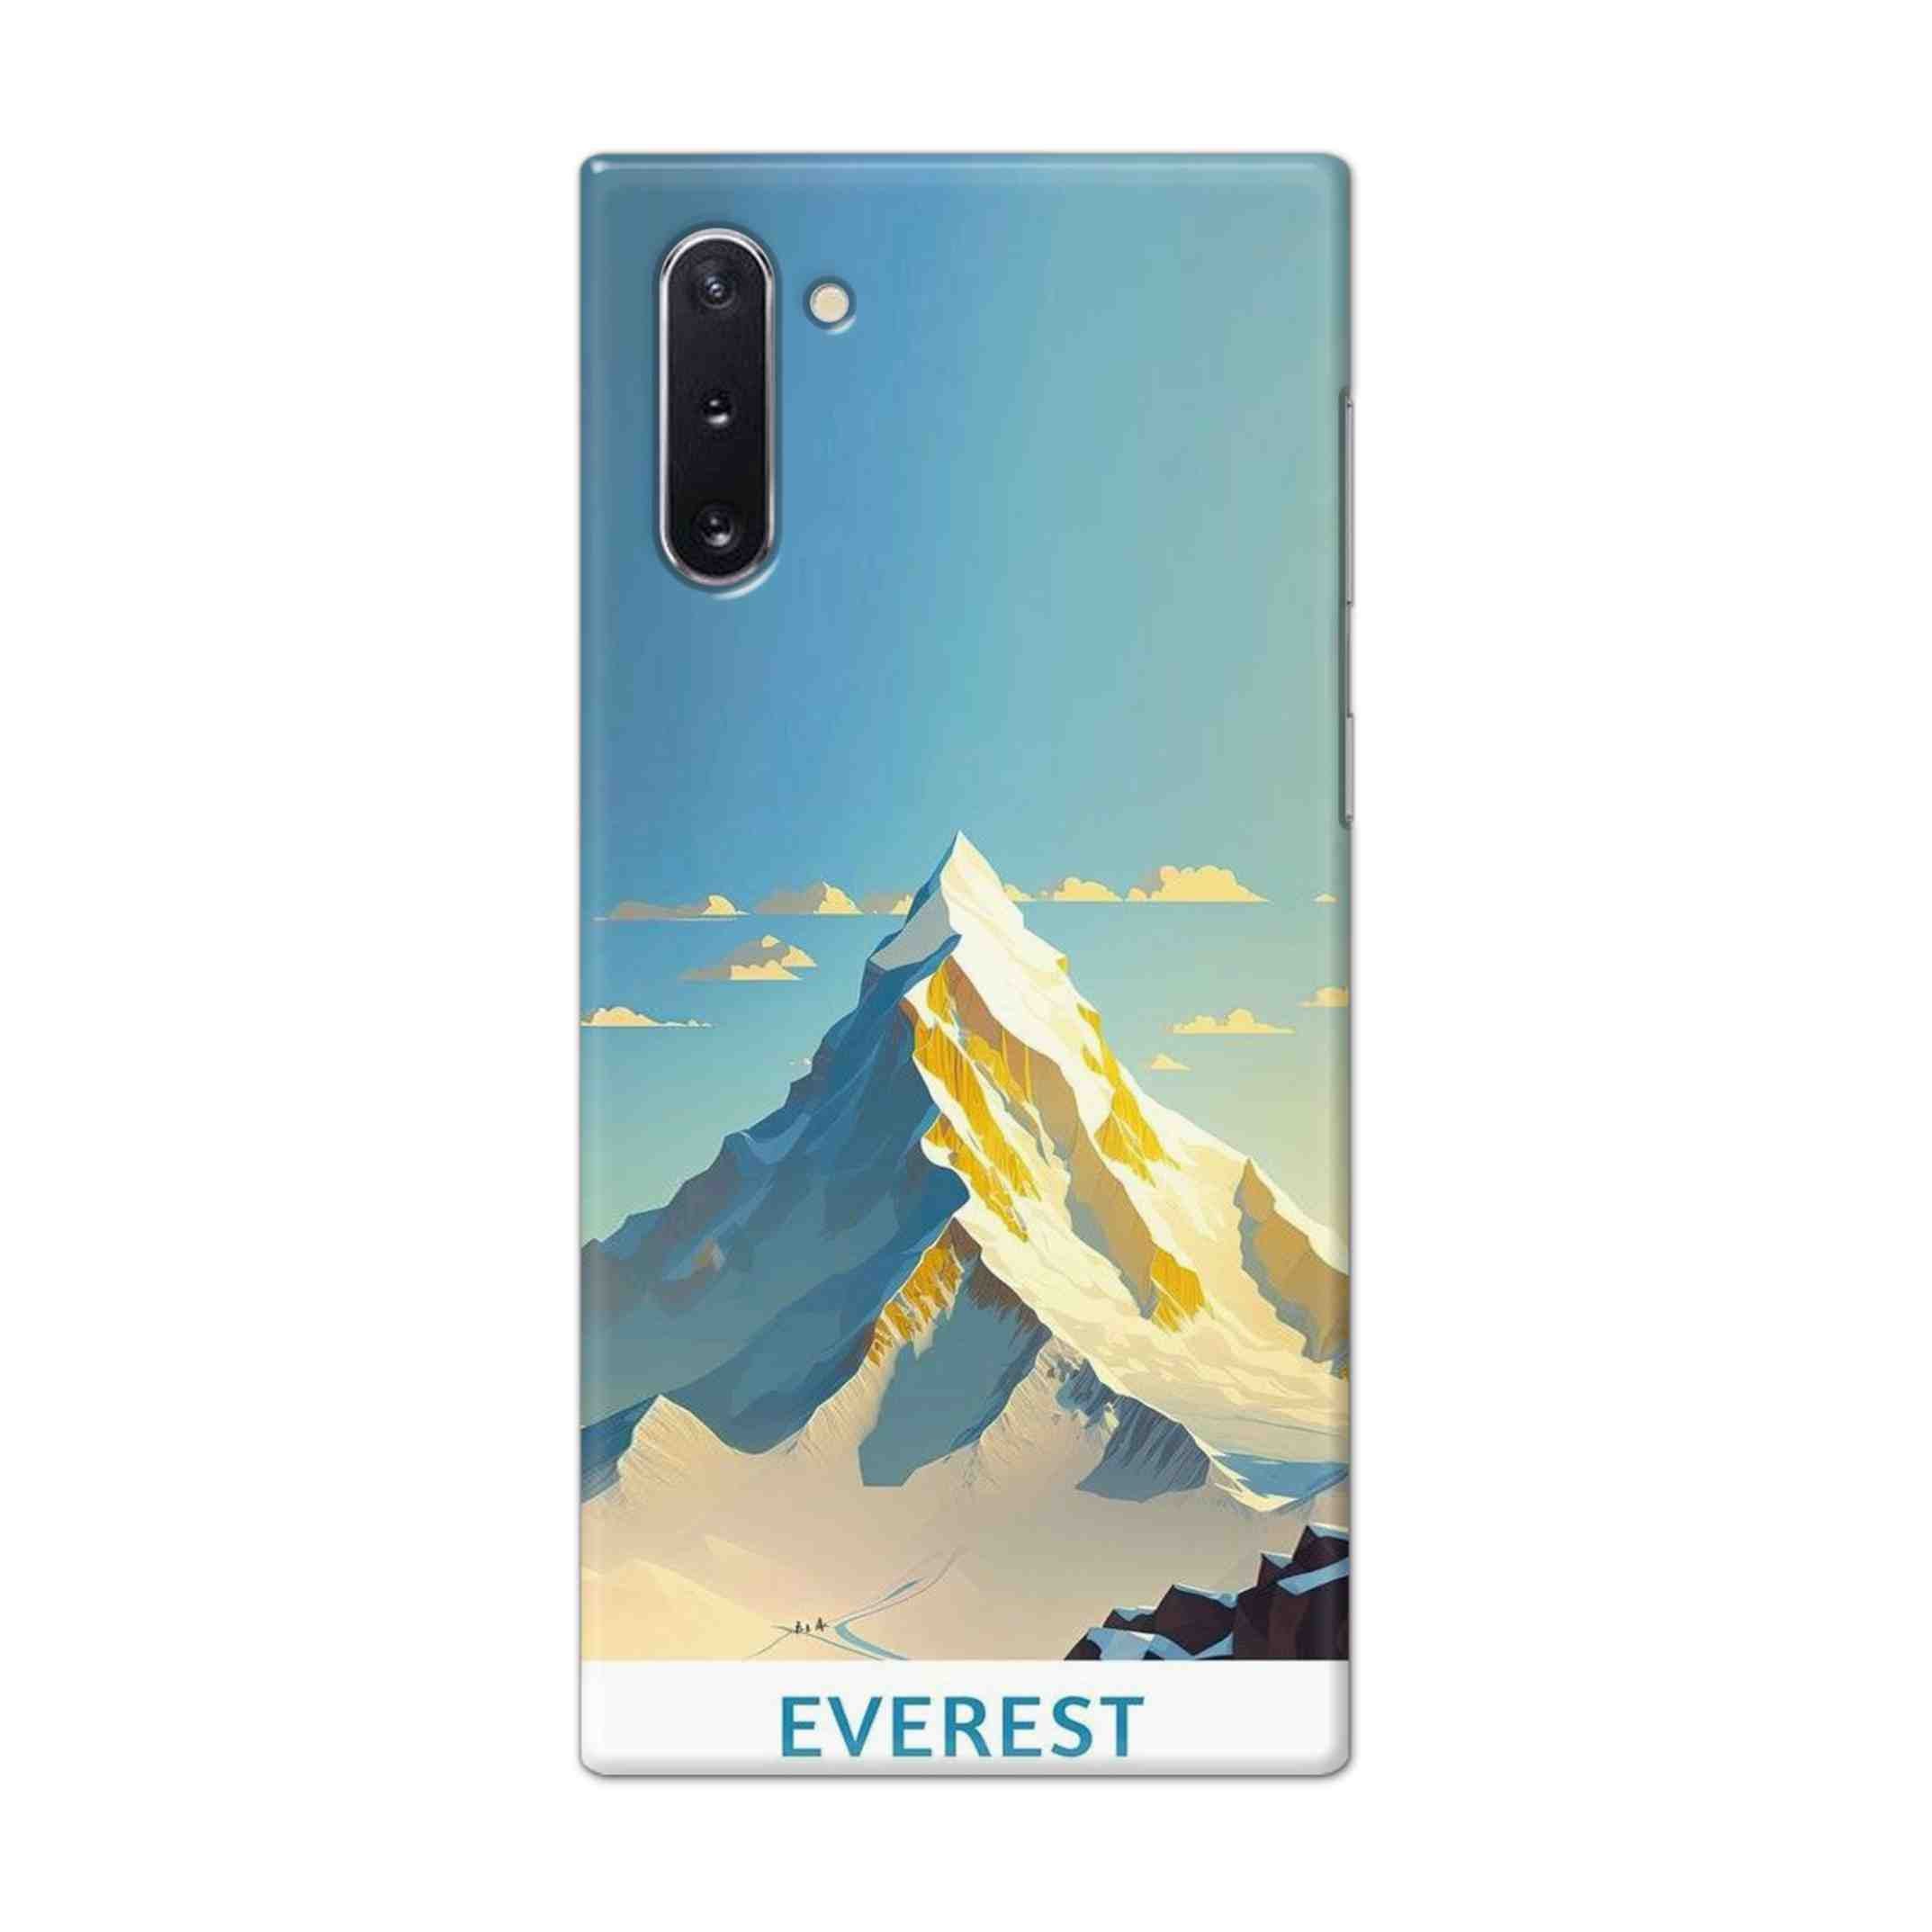 Buy Everest Hard Back Mobile Phone Case Cover For Samsung Galaxy Note 10 Online